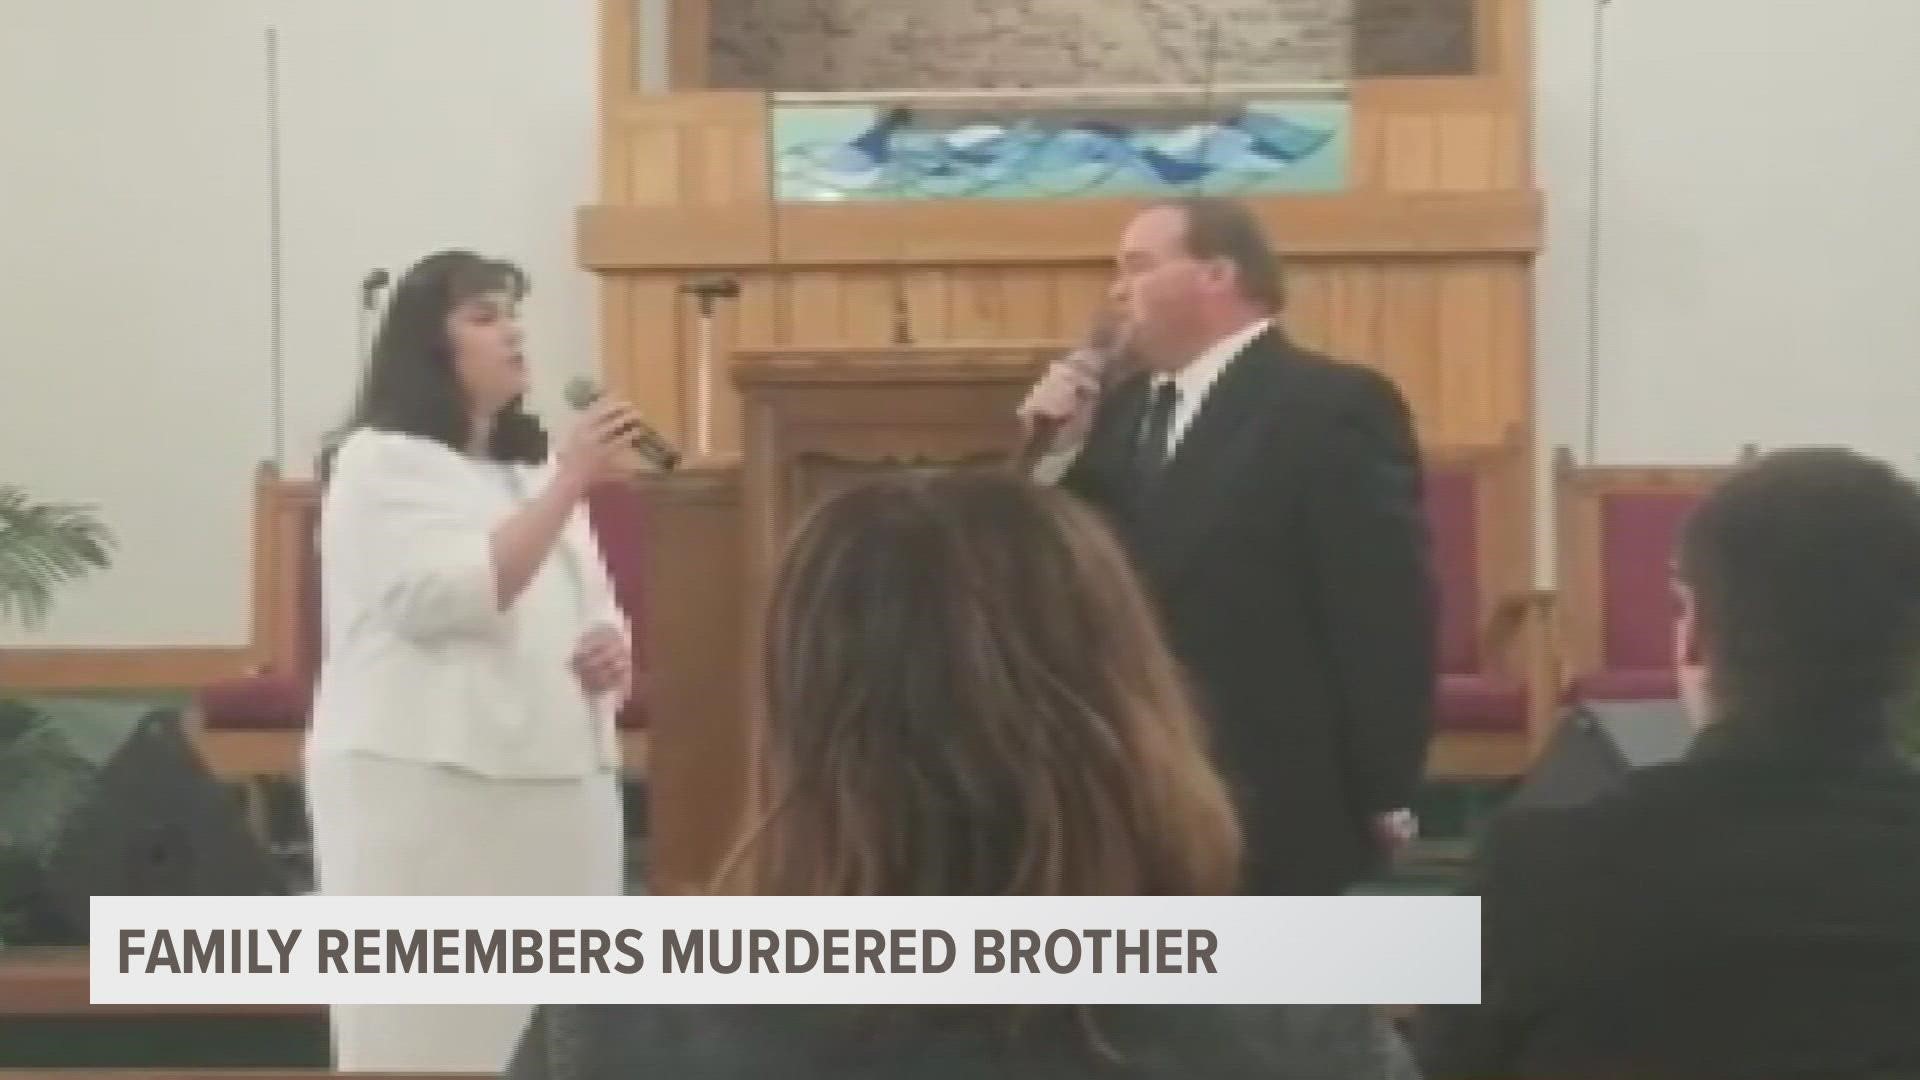 Joseph Wilder directed his church choir for more than 20 years. He was shot and killed at an ATM